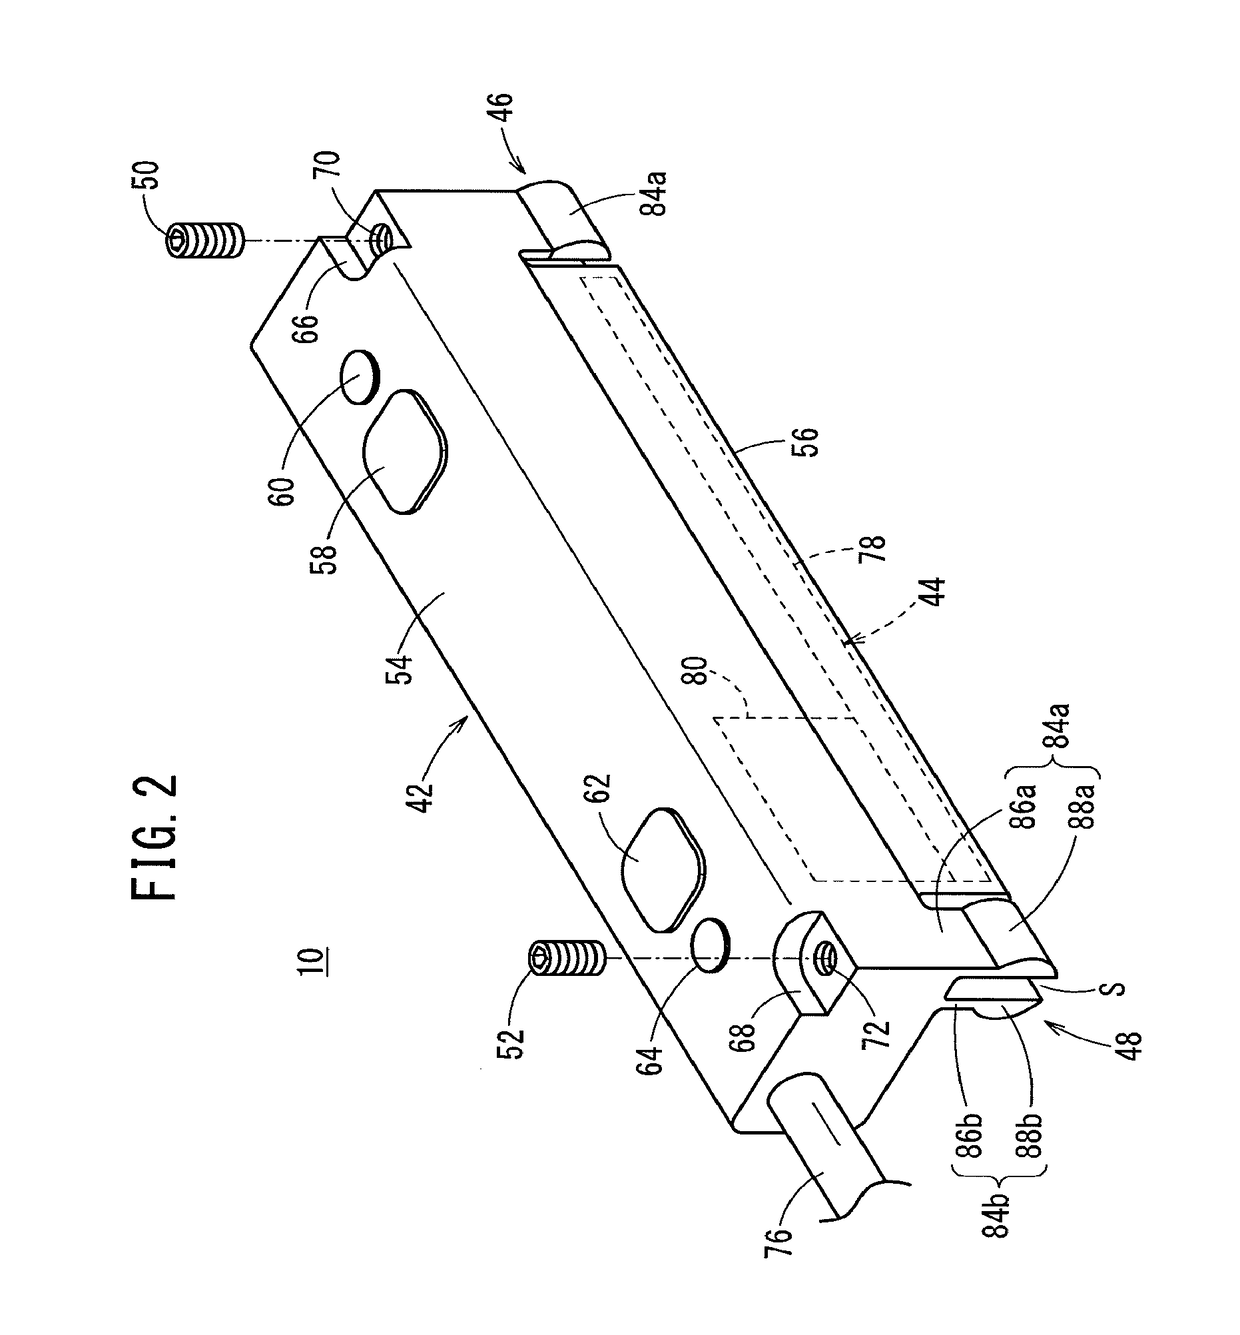 Mounting structure of a position detecting sensor